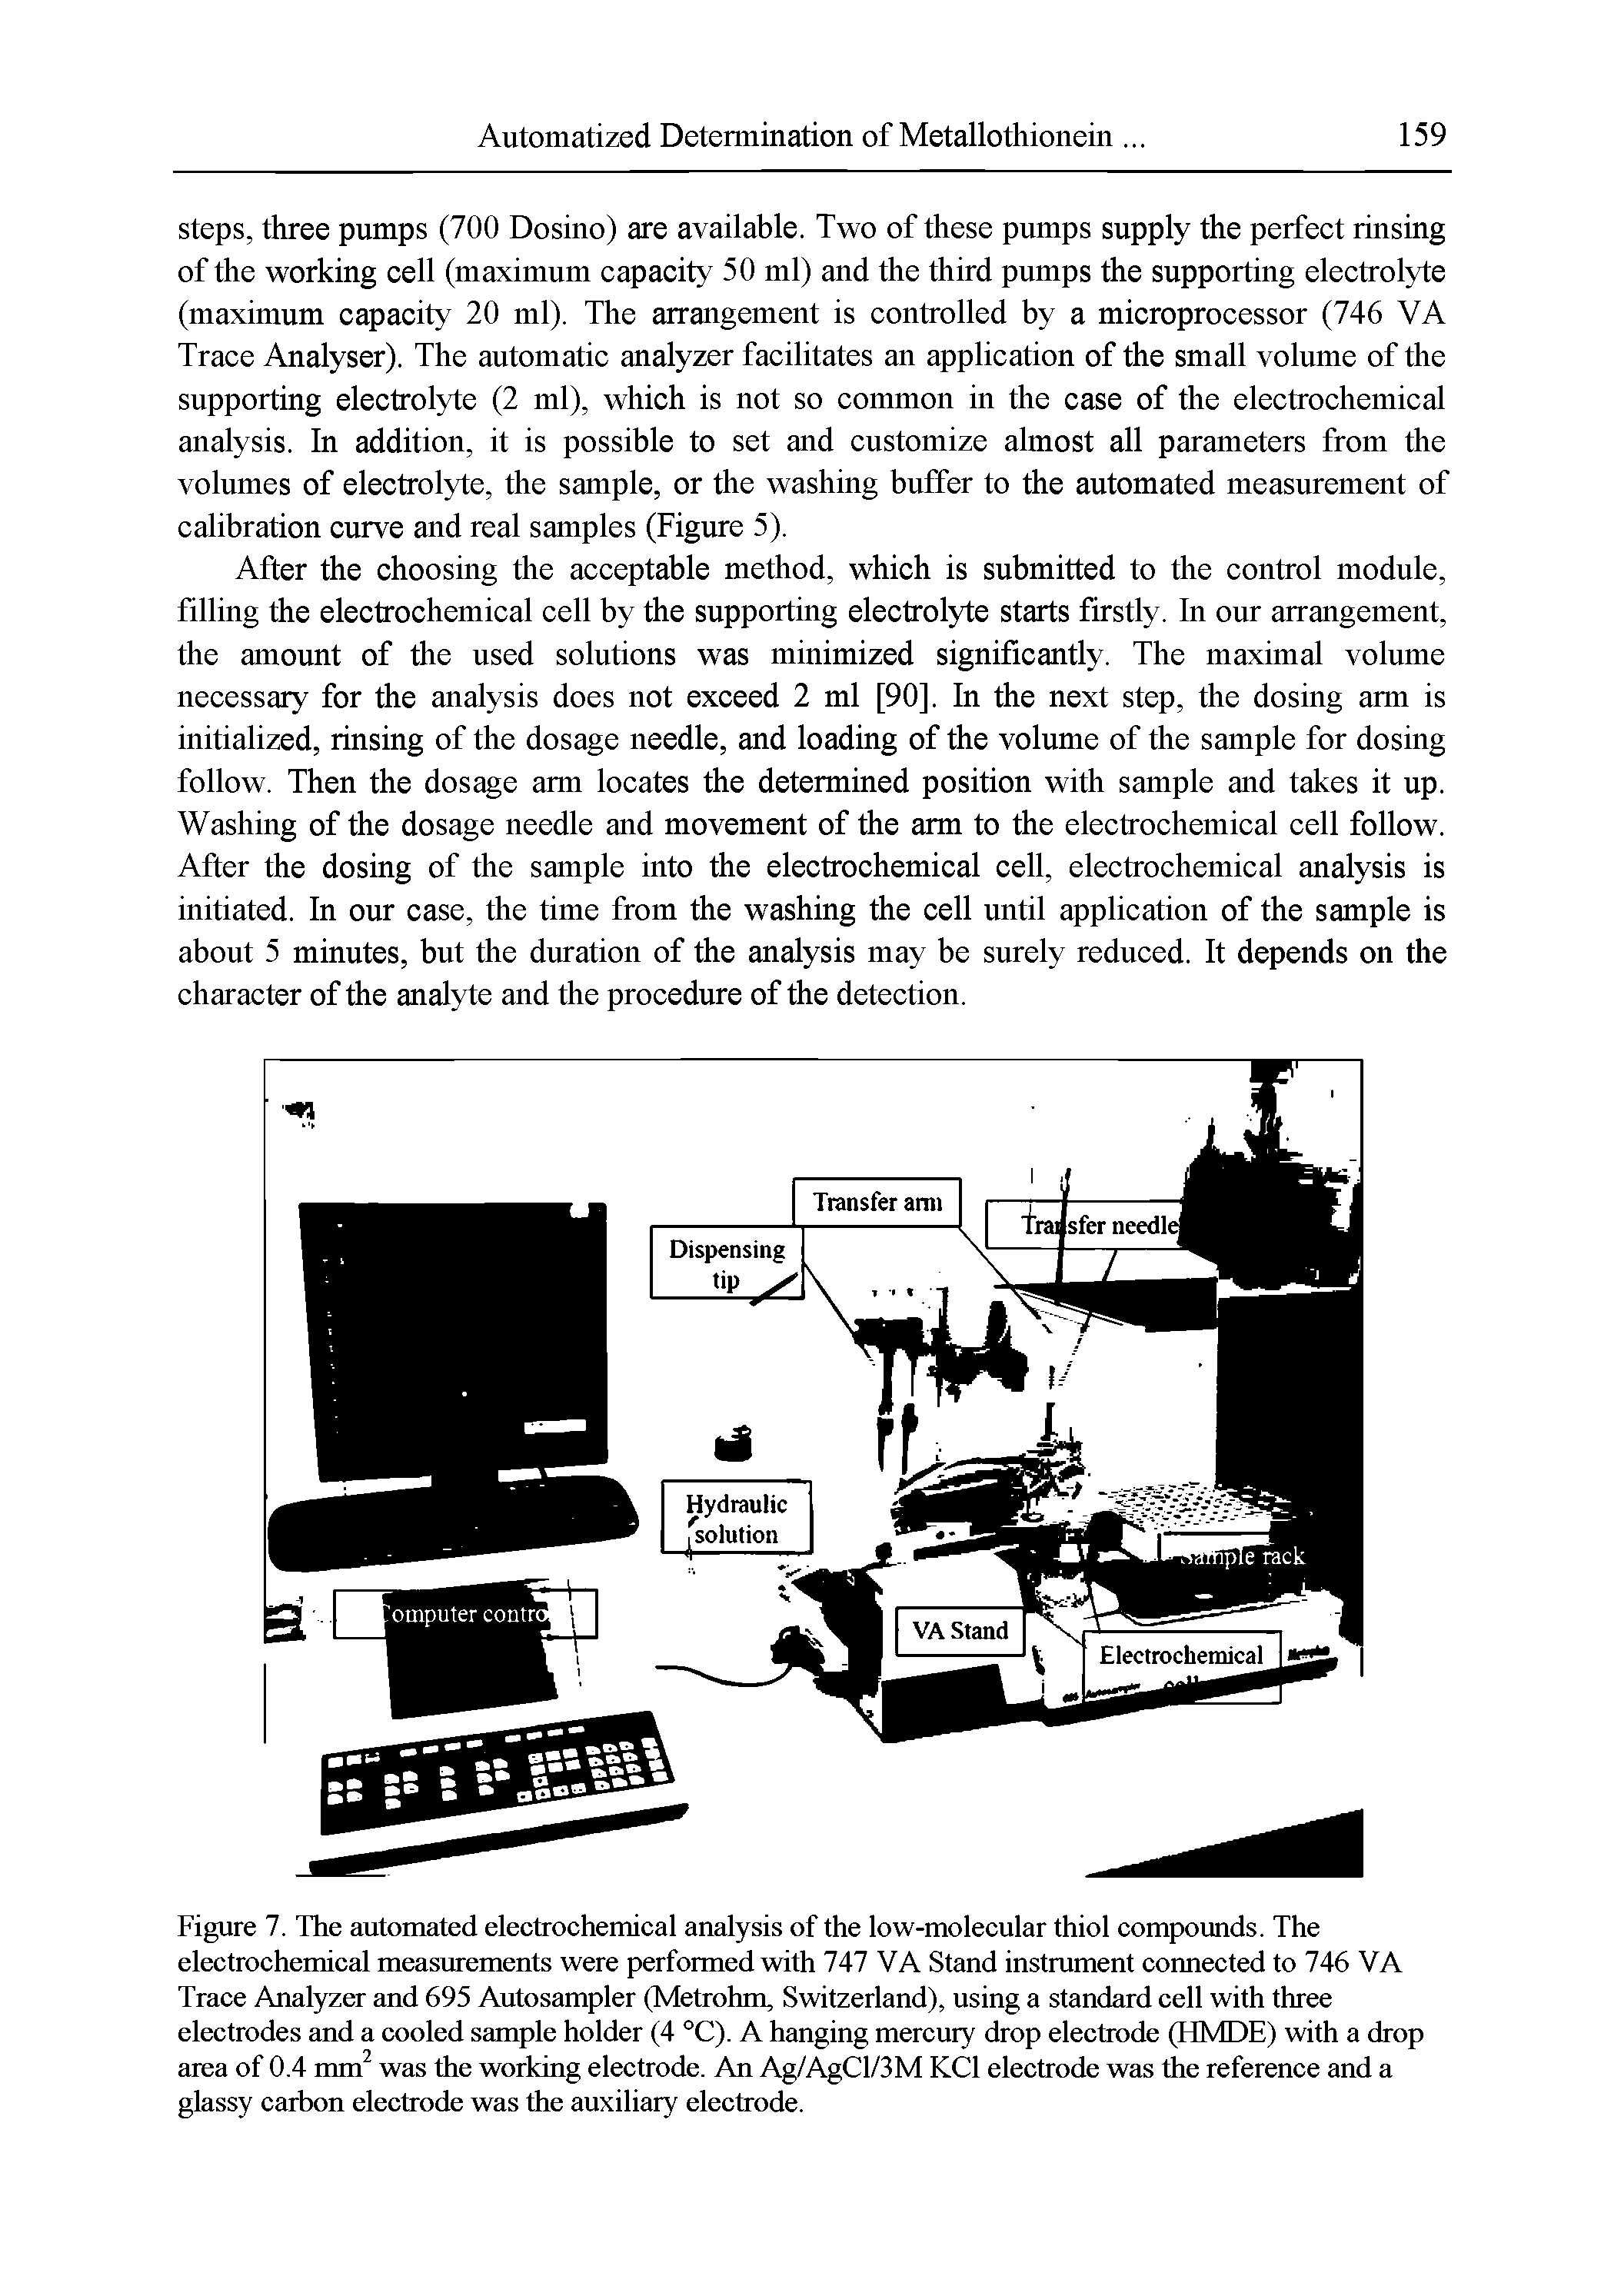 Figure 7. The automated electrochemical analysis of the low-molecular thiol compounds. The electrochemical measurements were performed with 747 VA Stand instrument connected to 746 VA Trace Analyzer and 695 Autosampler (Metrohm, Switzerland), using a standard cell with three electrodes and a cooled sample holder (4 °C). A hanging mercury drop electrode (HMDE) with a drop area of 0.4 mm was the working electrode. An Ag/AgCl/3M KCl electrode was the reference and a glassy carbon electrode was the auxiliary electrode.